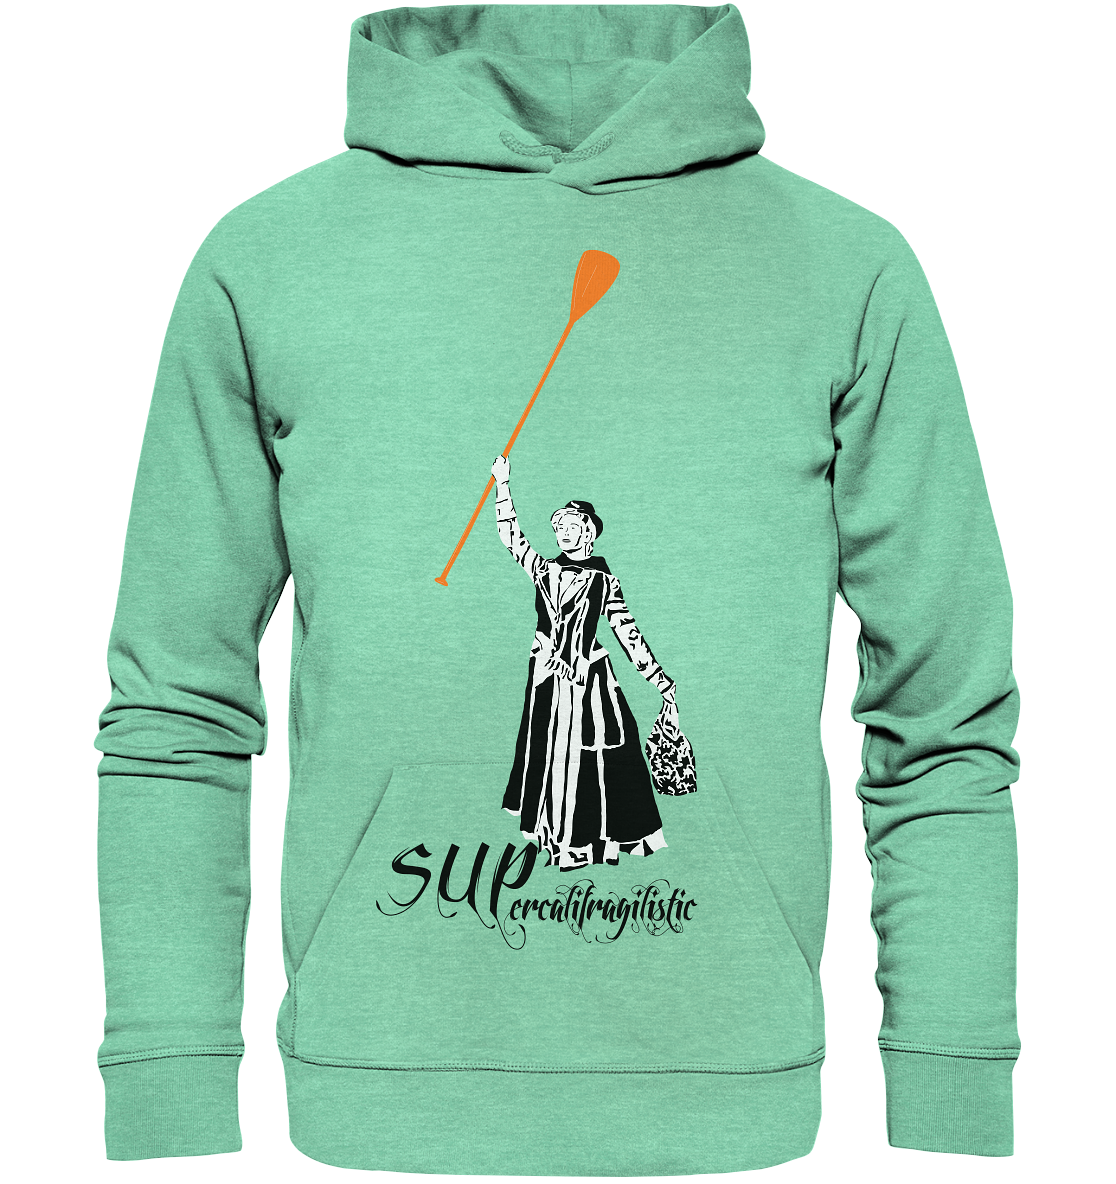 SUPlebrity is SUP Fashion, Stand Up Paddling Wear for Boys and Girls, 